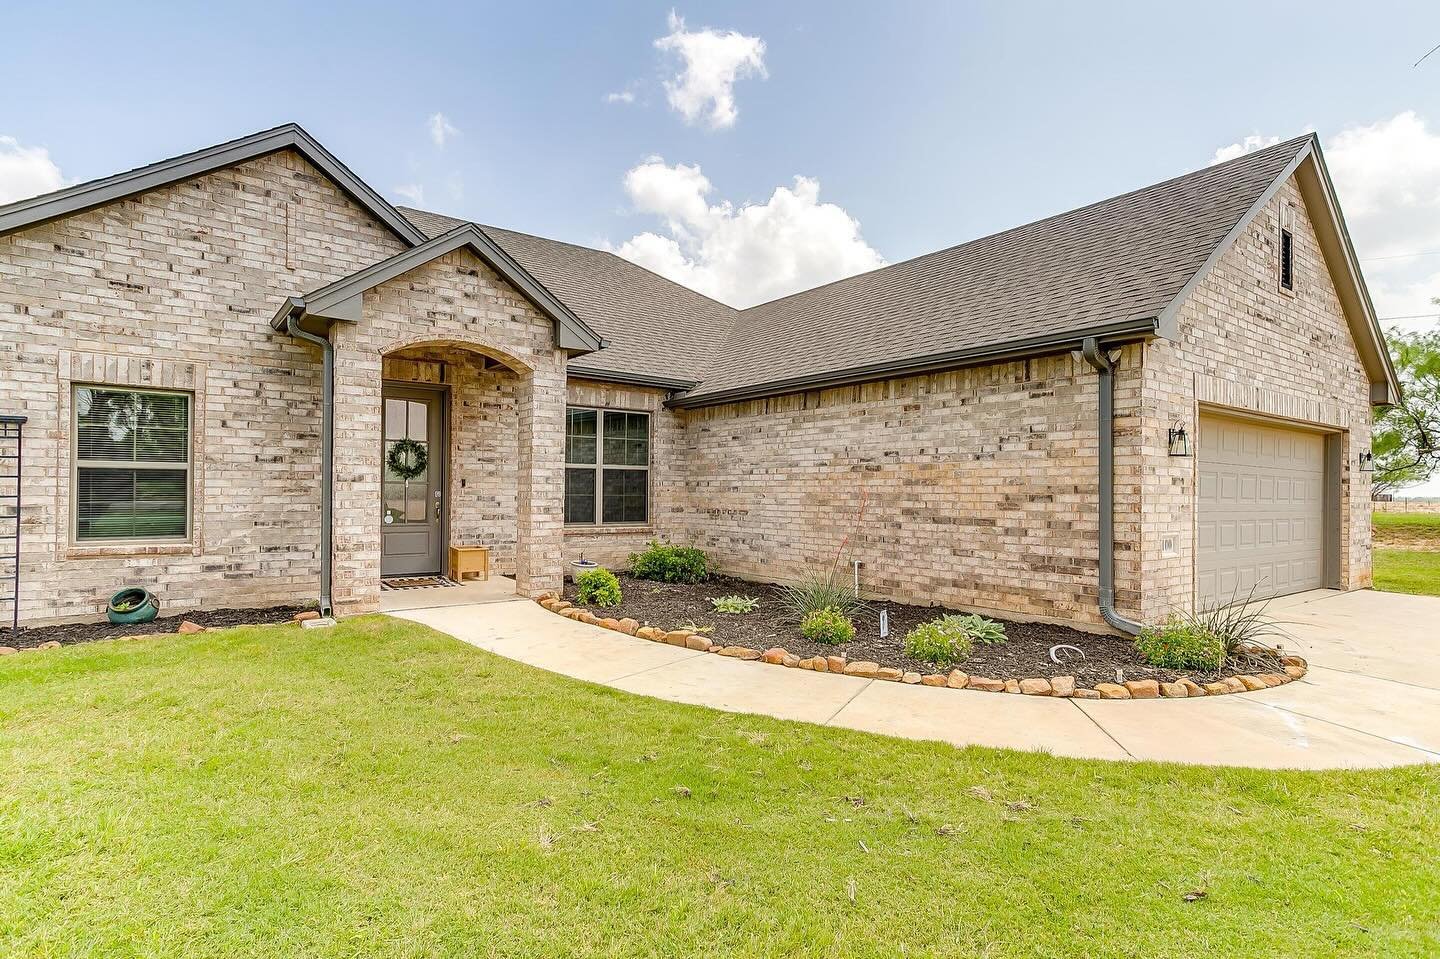 Charming ranch-style home on 2-acre corner lot, right in the heart of Brock ISD. This cozy home boasts a spacious 1,857 square feet, with a wide-open kitchen and living area. Out back, enjoy all the space you could ever desire, and without any HOA re